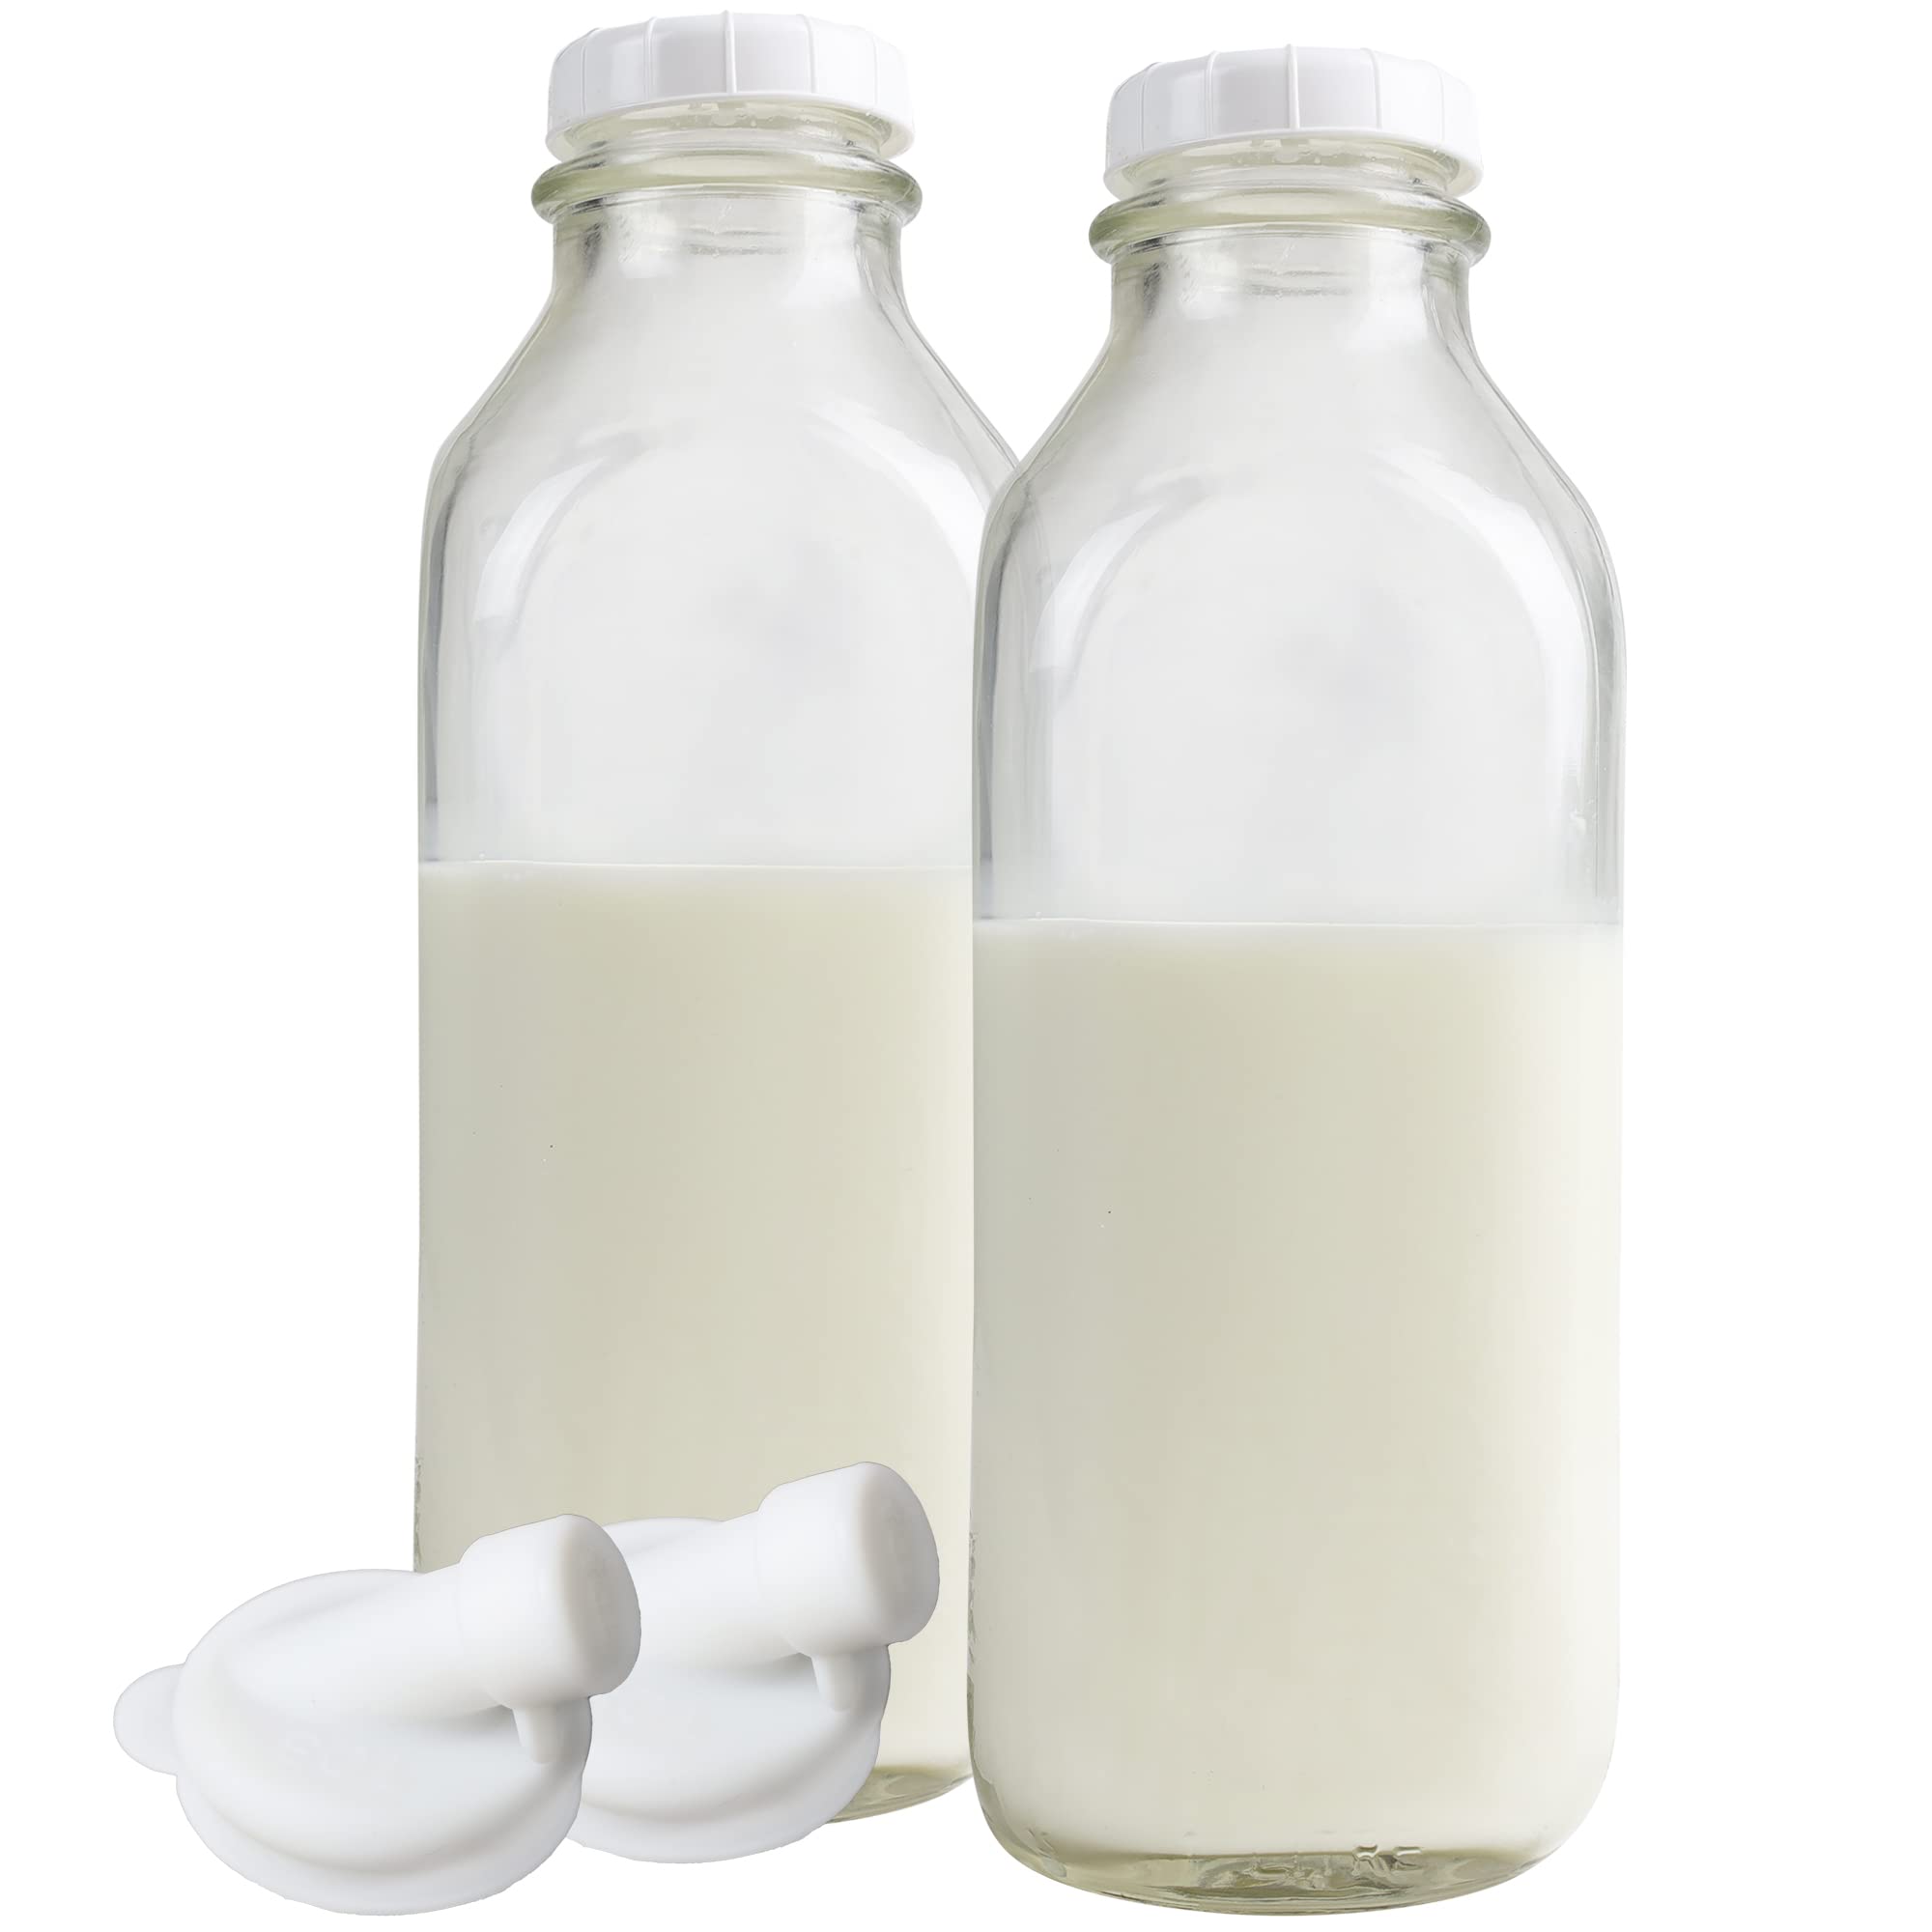 Two milk bottles on a white background.